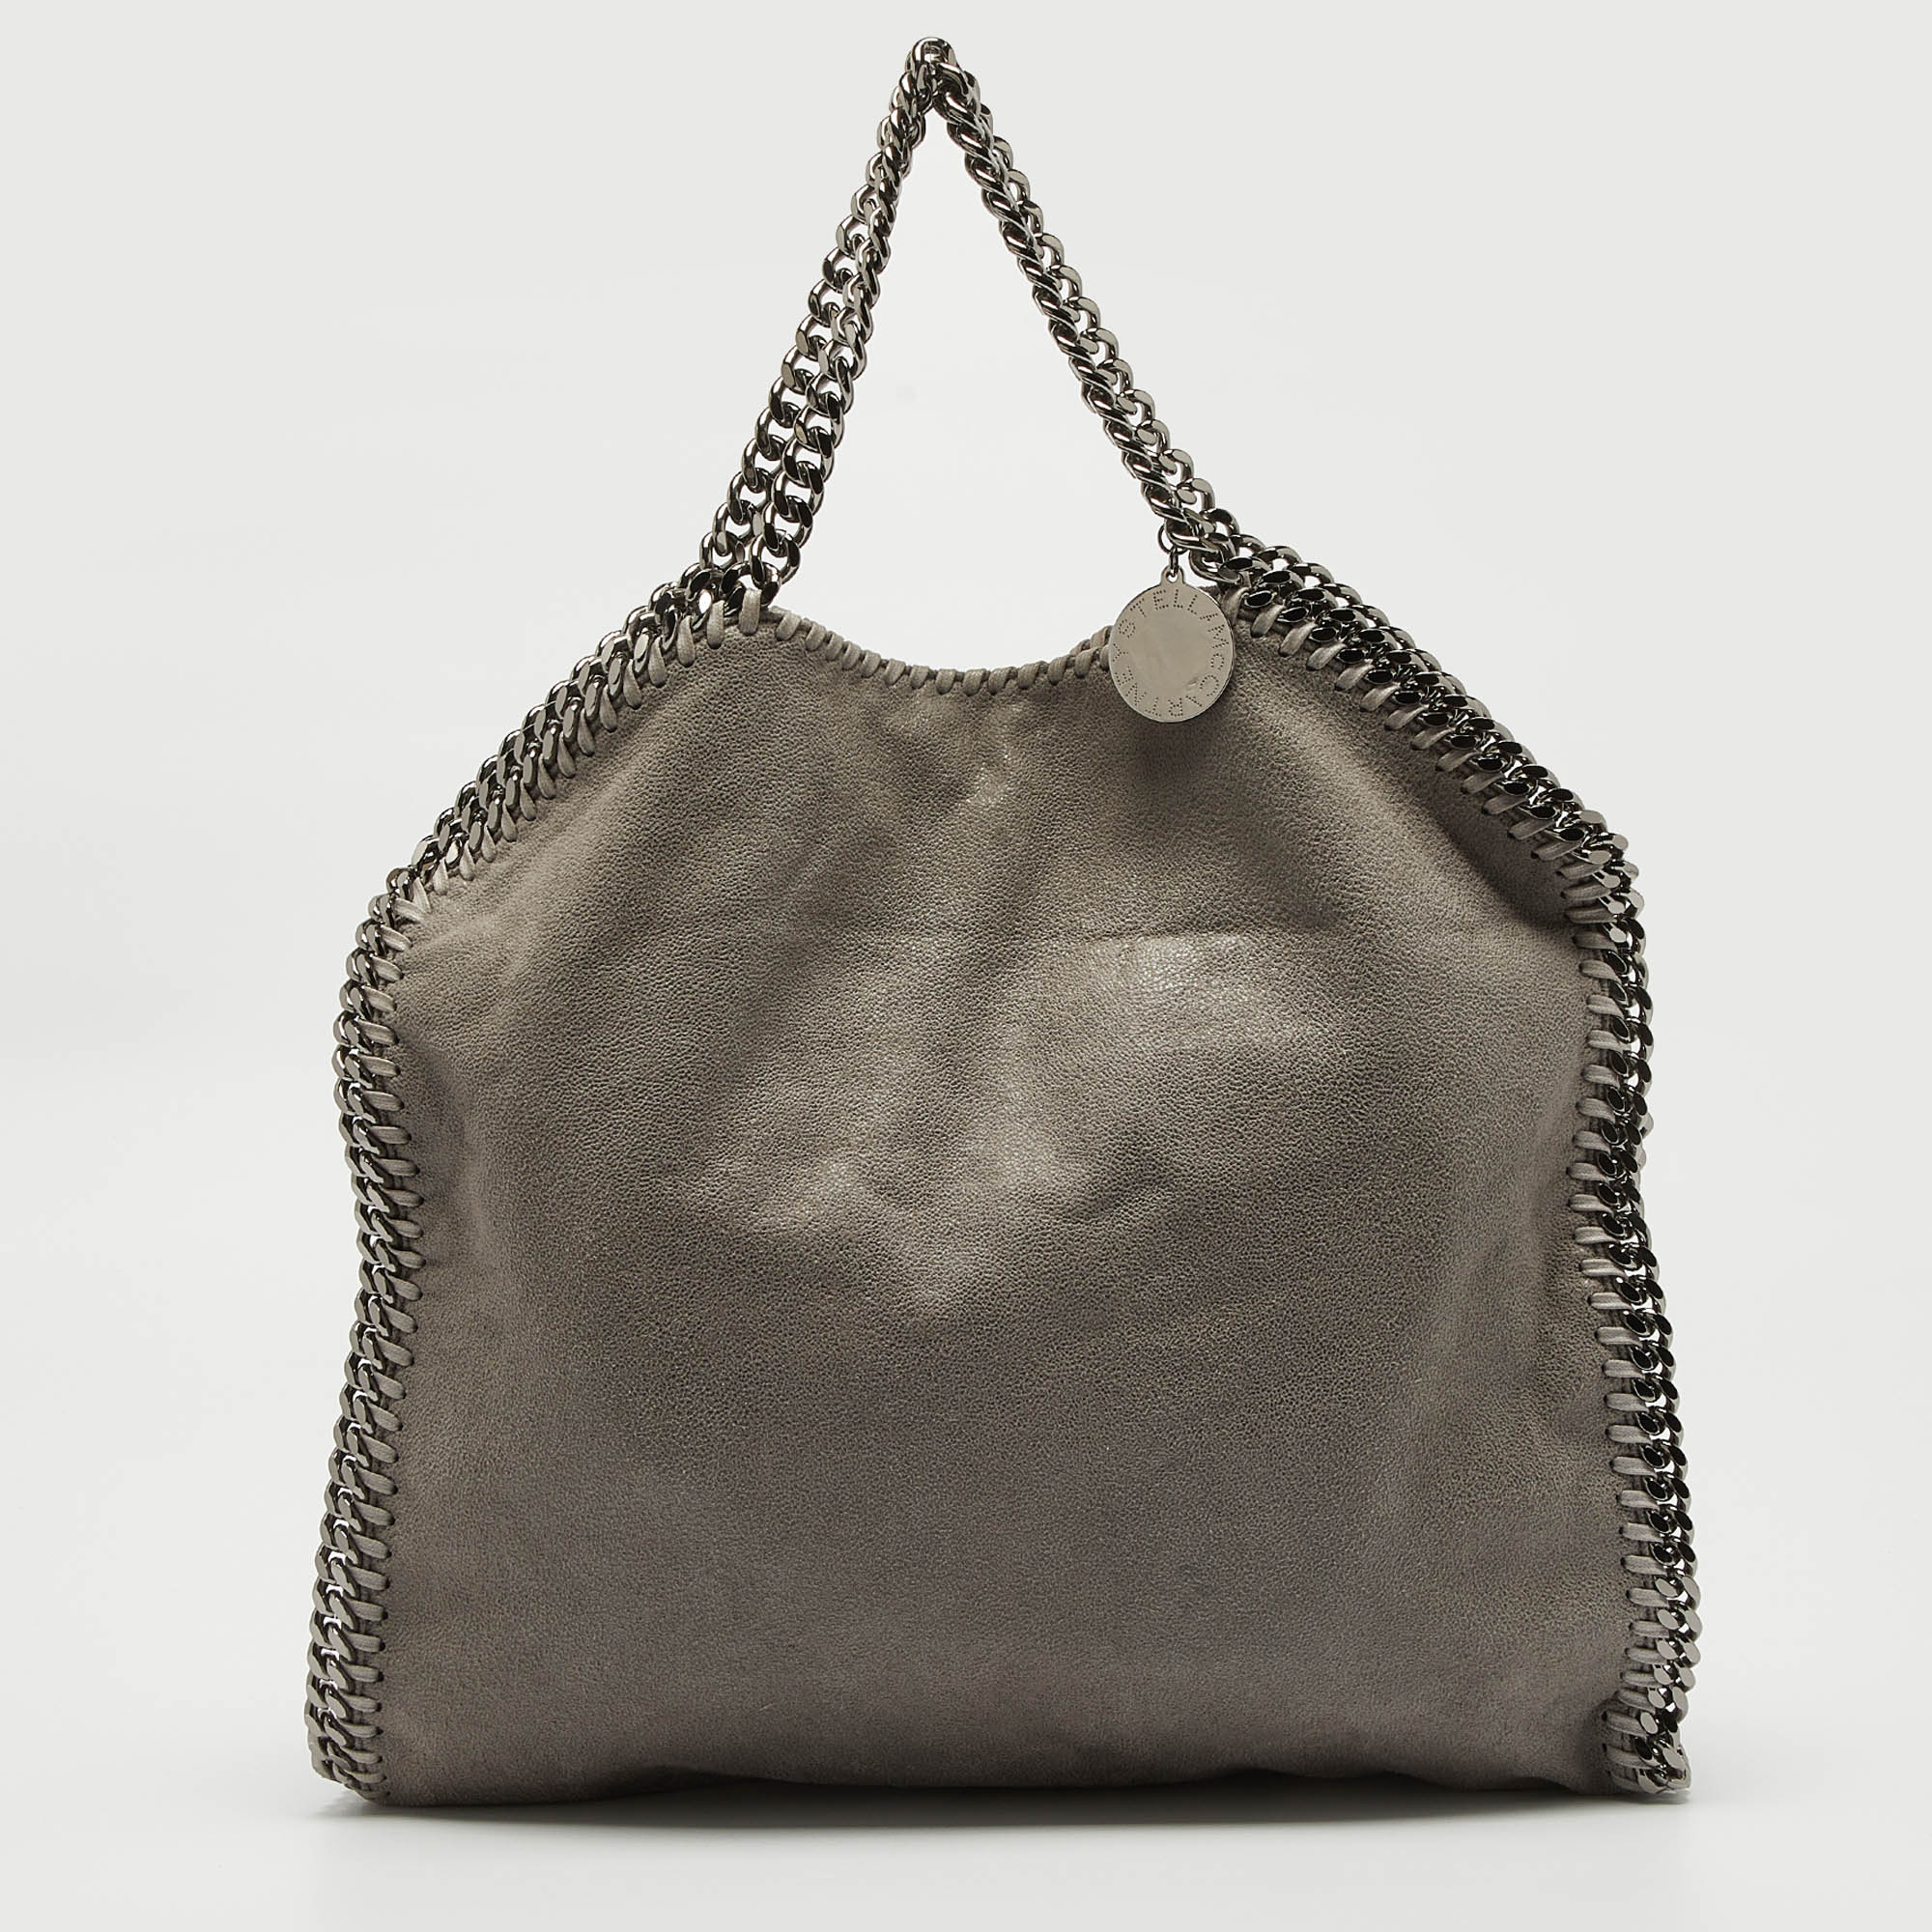 The chain whipstitch detailing beautifully outlines this Stella Mc Cartney Falabella tote. Crafted from faux leather it has been adorned with silver tone accents and it can be carried with dual chain handles at the top. The fabric lined interior can safely store your essentials.